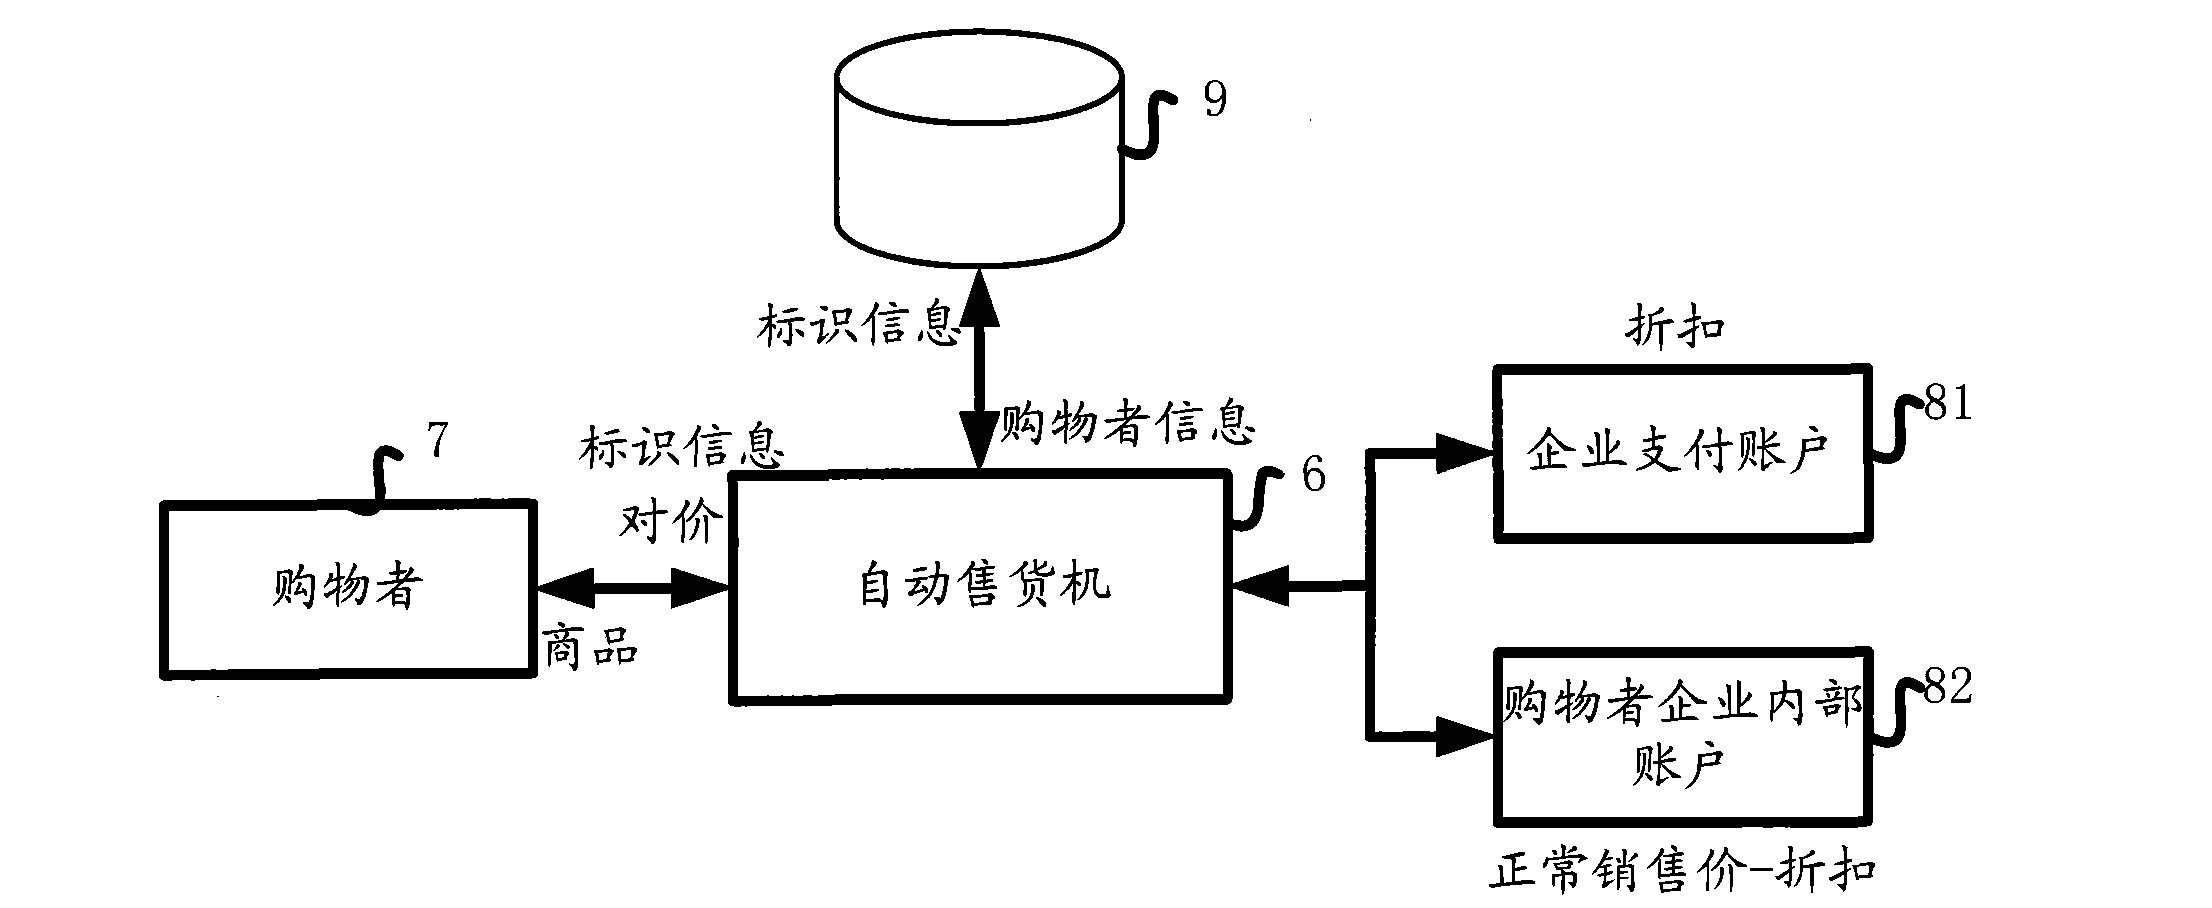 Control device and method for selling goods by intra-group vending machine